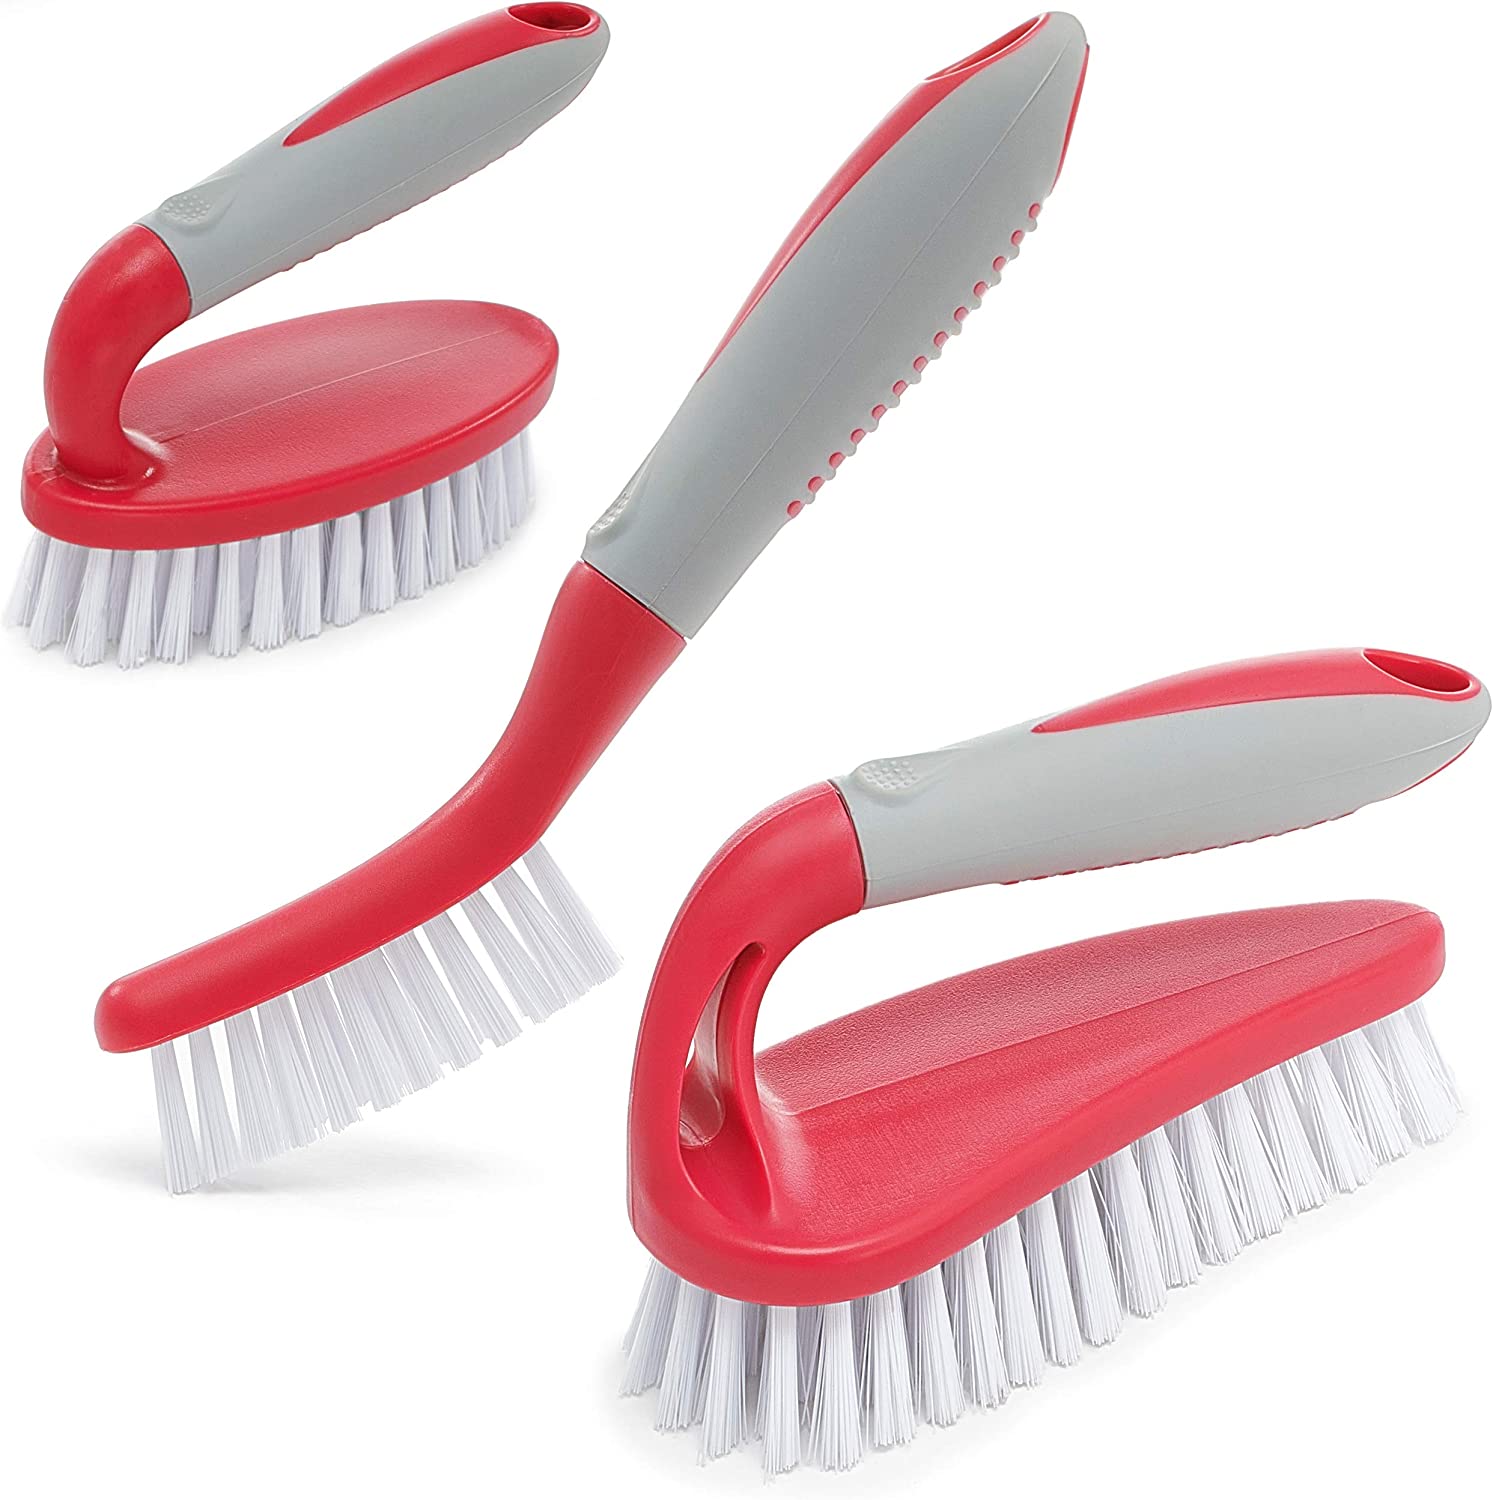 Trazon Non-Slip Rubber Cleaning Brushes, 3-Pack